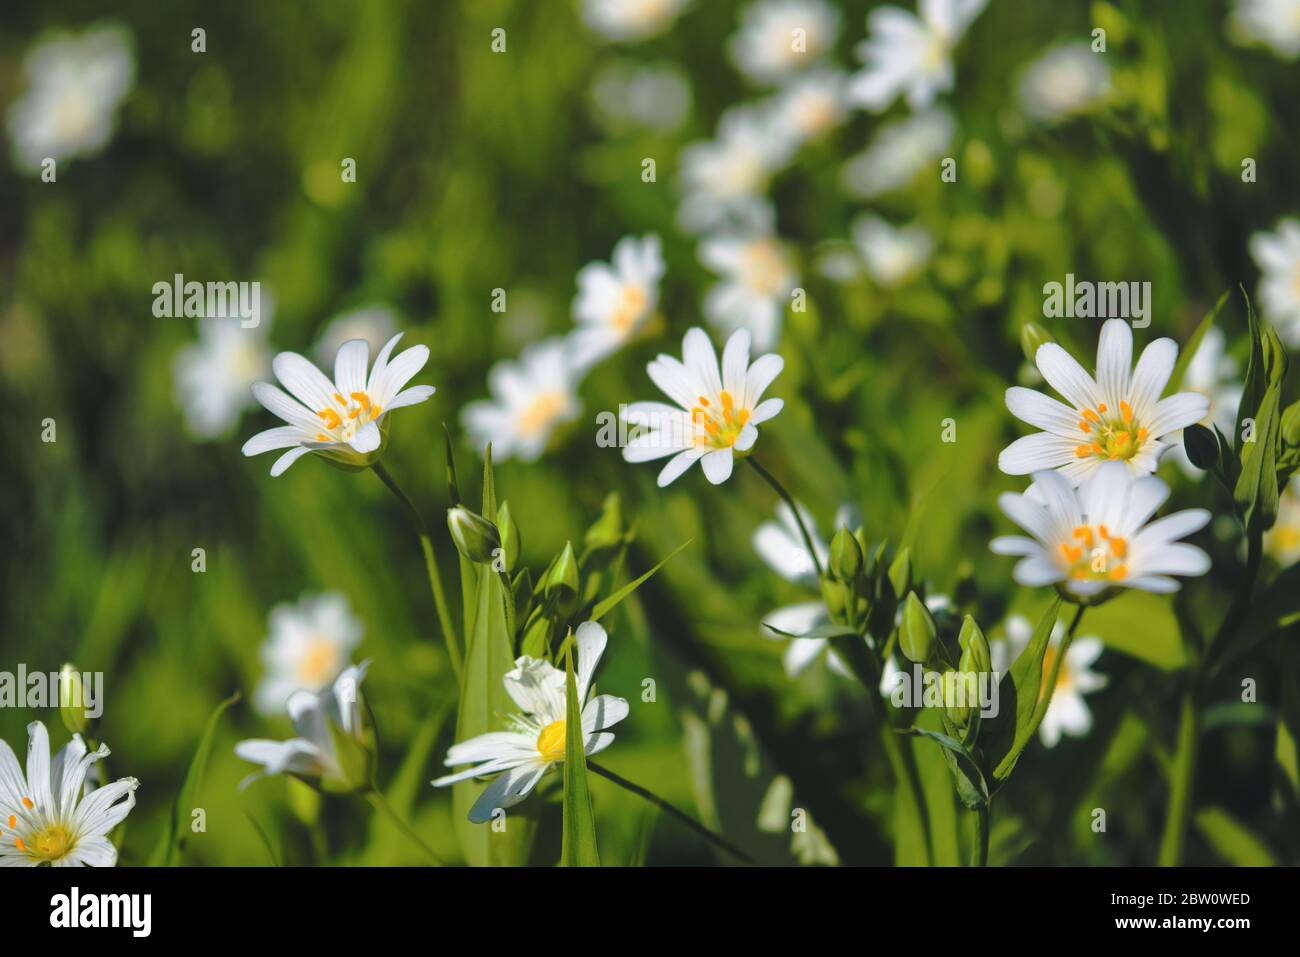 A field of stellaria media flowers in the forest. Stock Photo